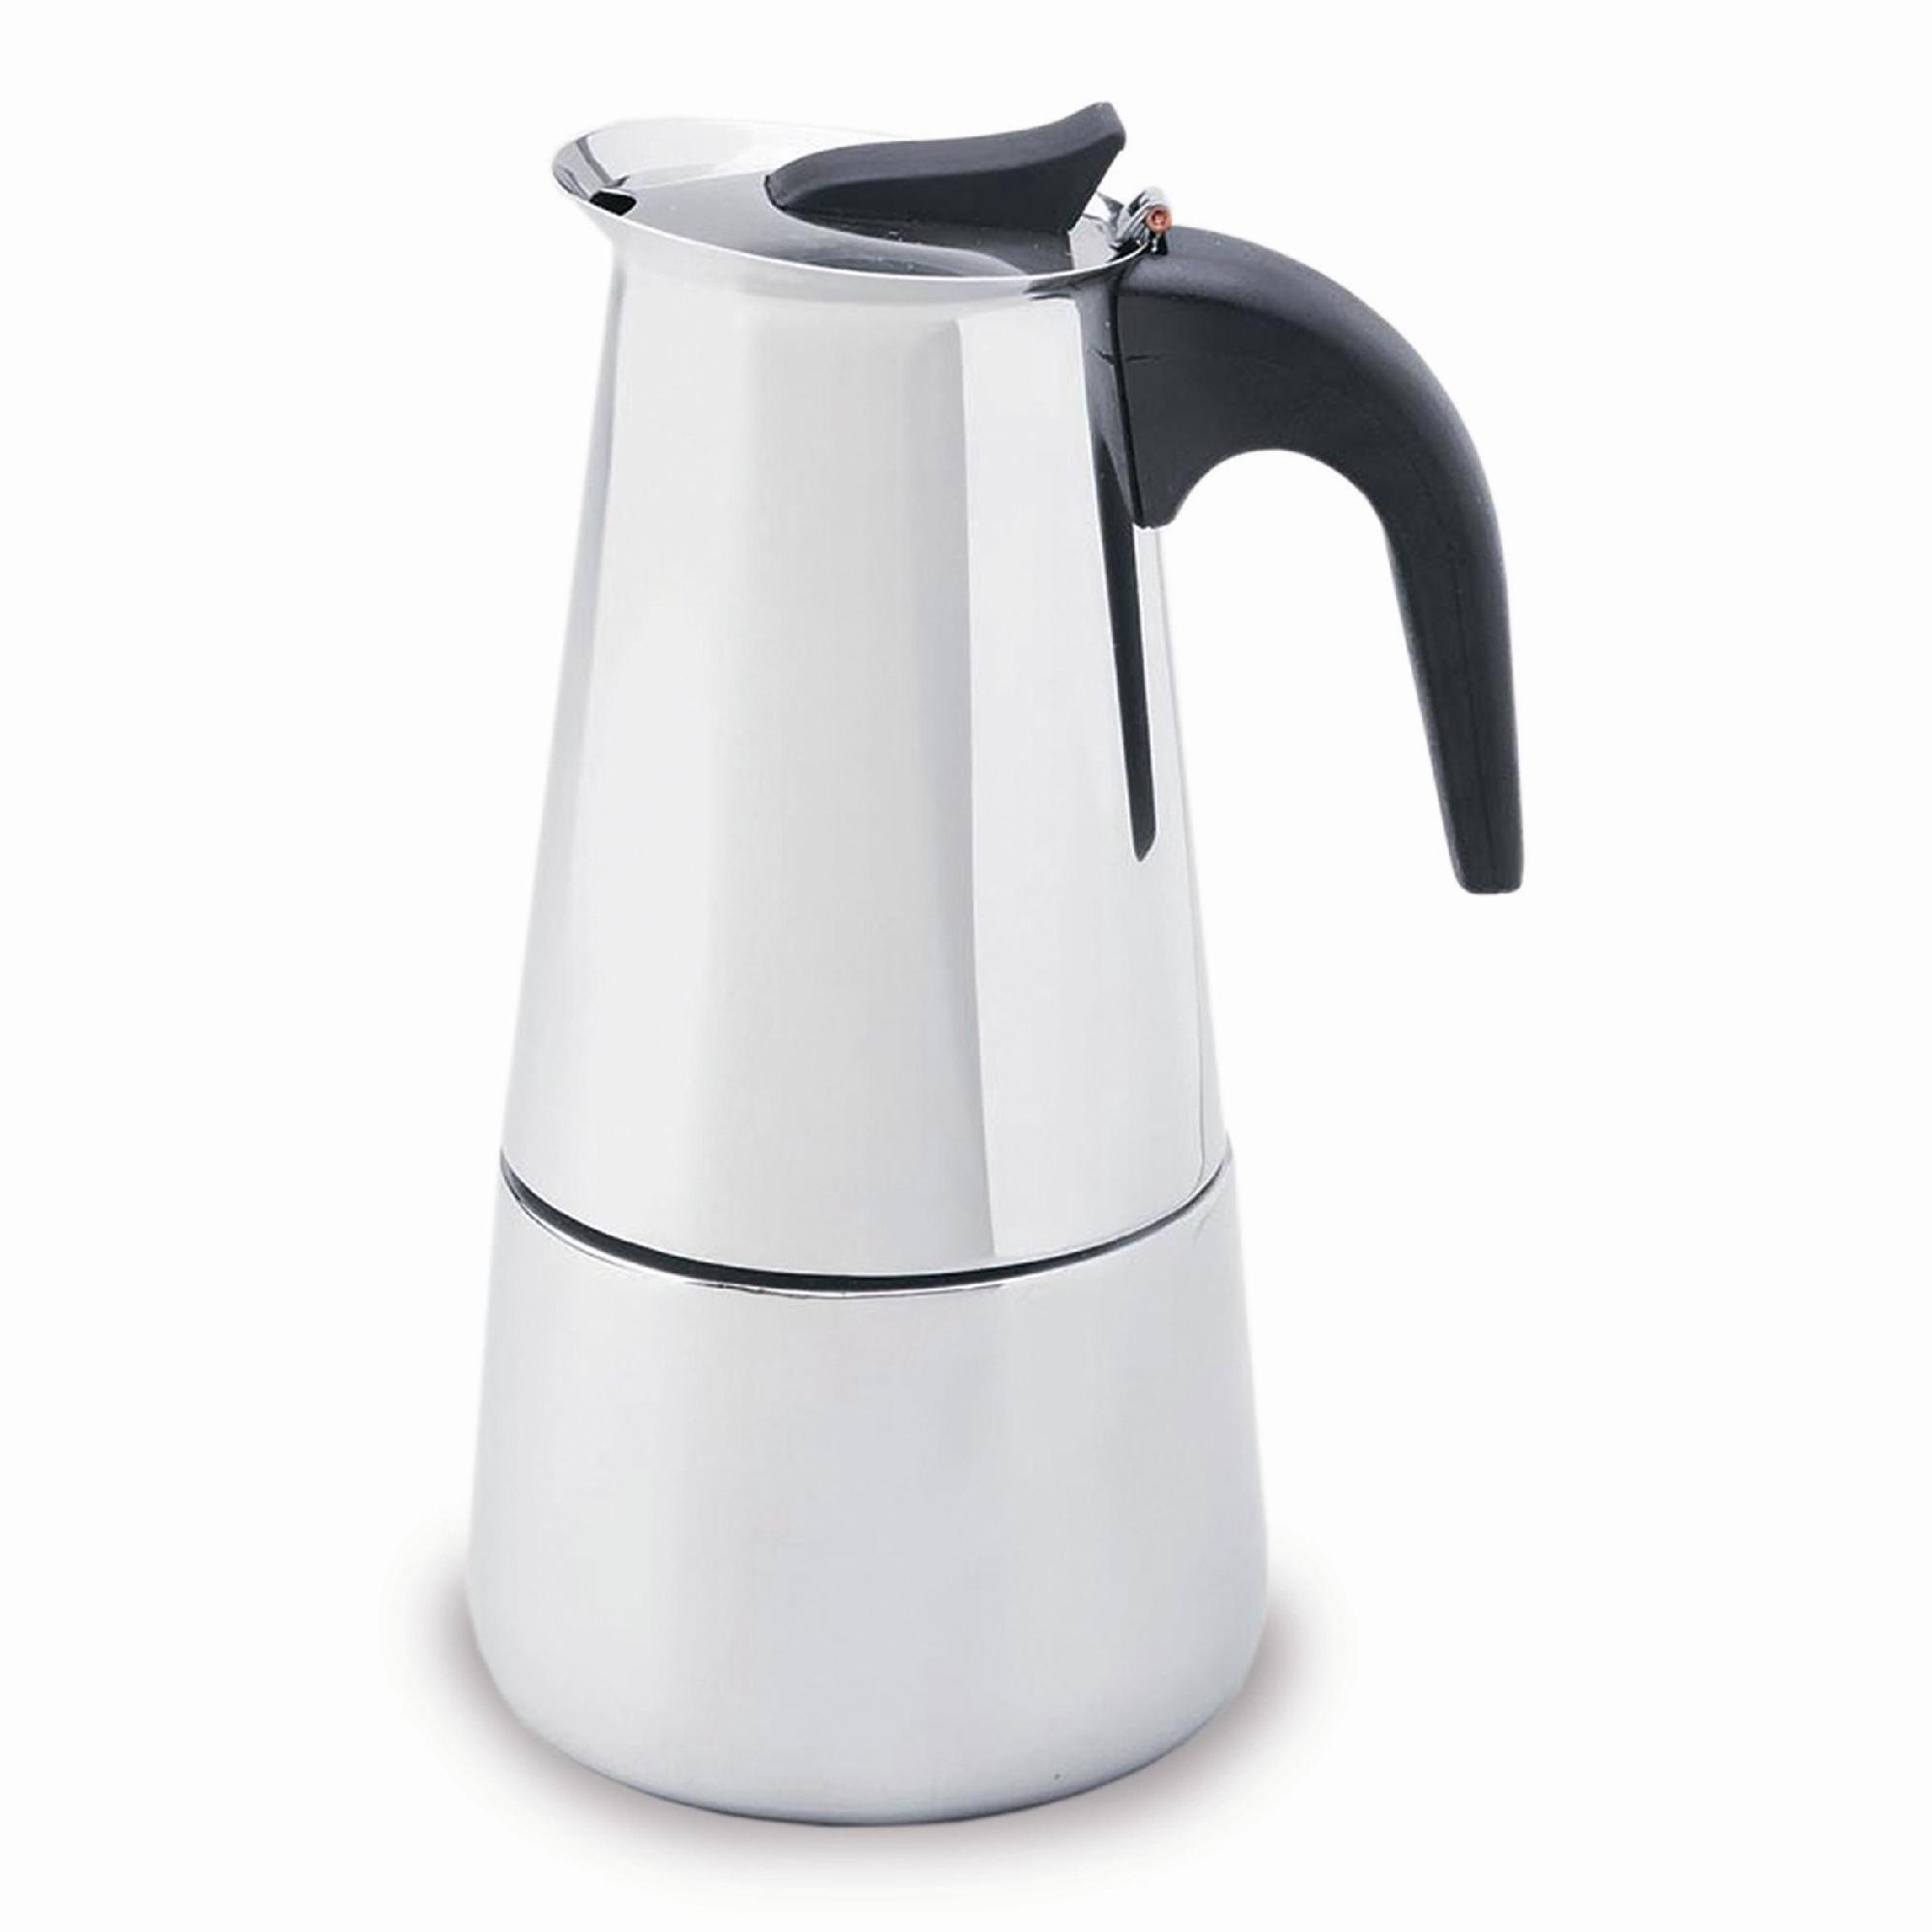 Imusa 6-Cup Stovetop Coffee Maker - Stainless Steel